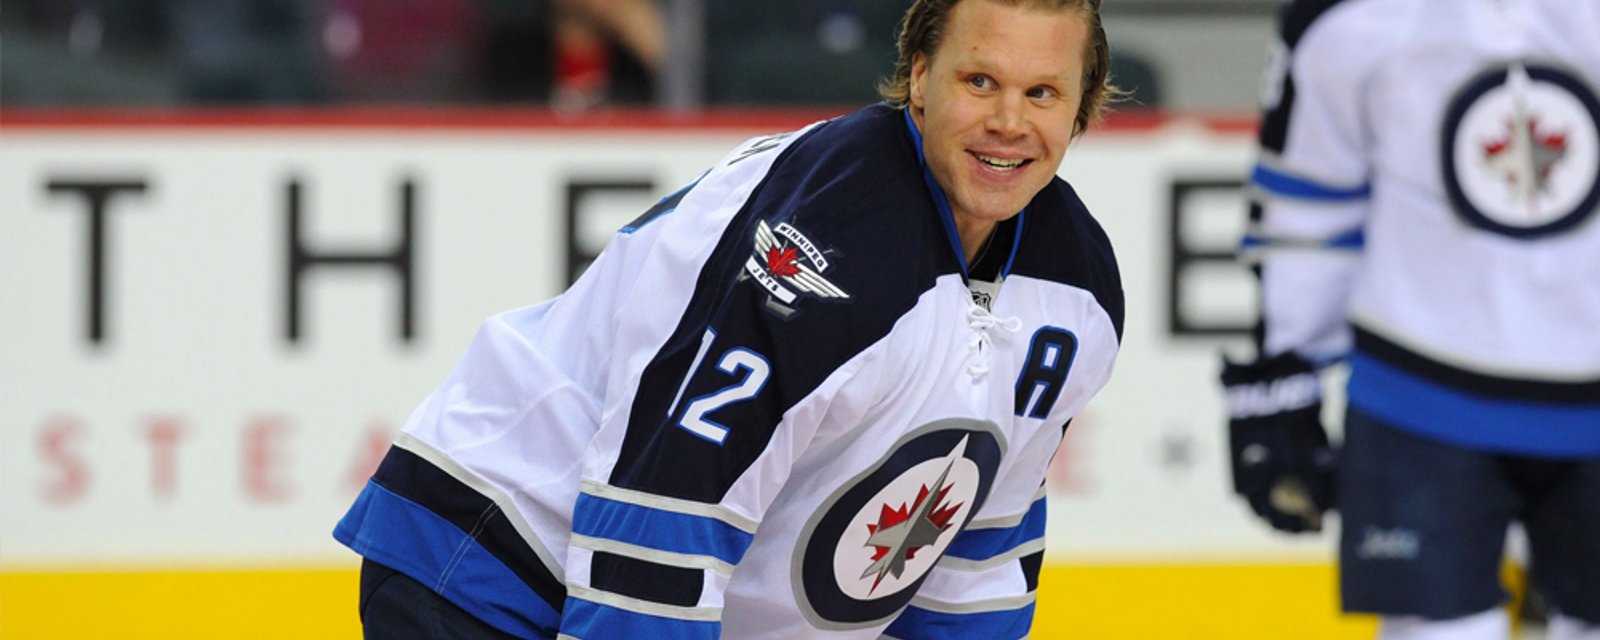 Six years after retirement Olli Jokinen is ready to return to the NHL